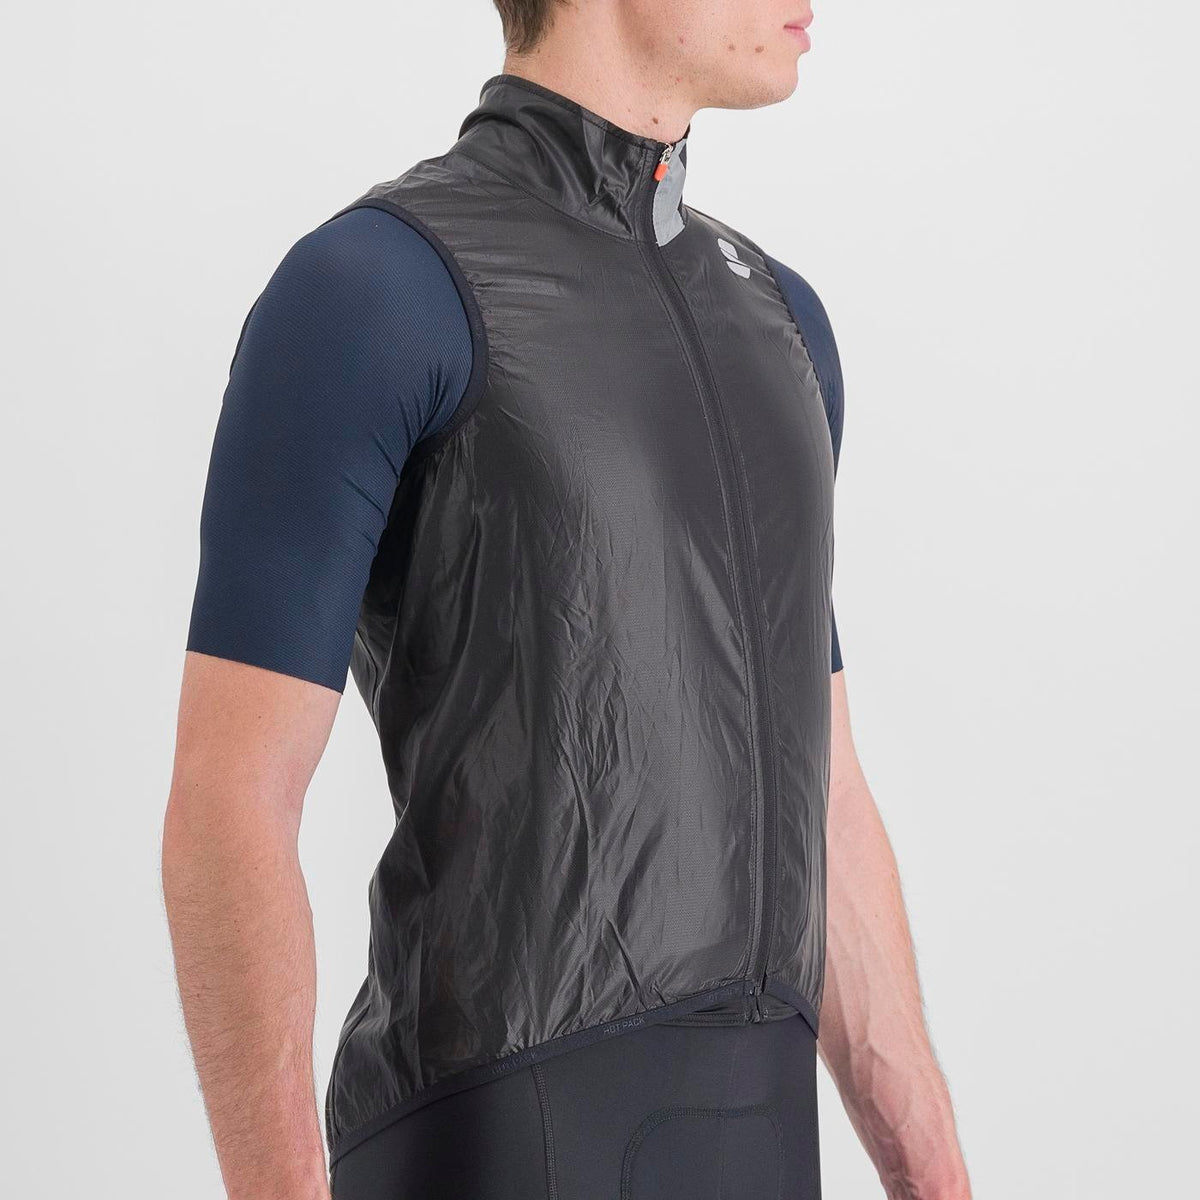 Veste Coupe-Vent Hot Pack Easylight Homme